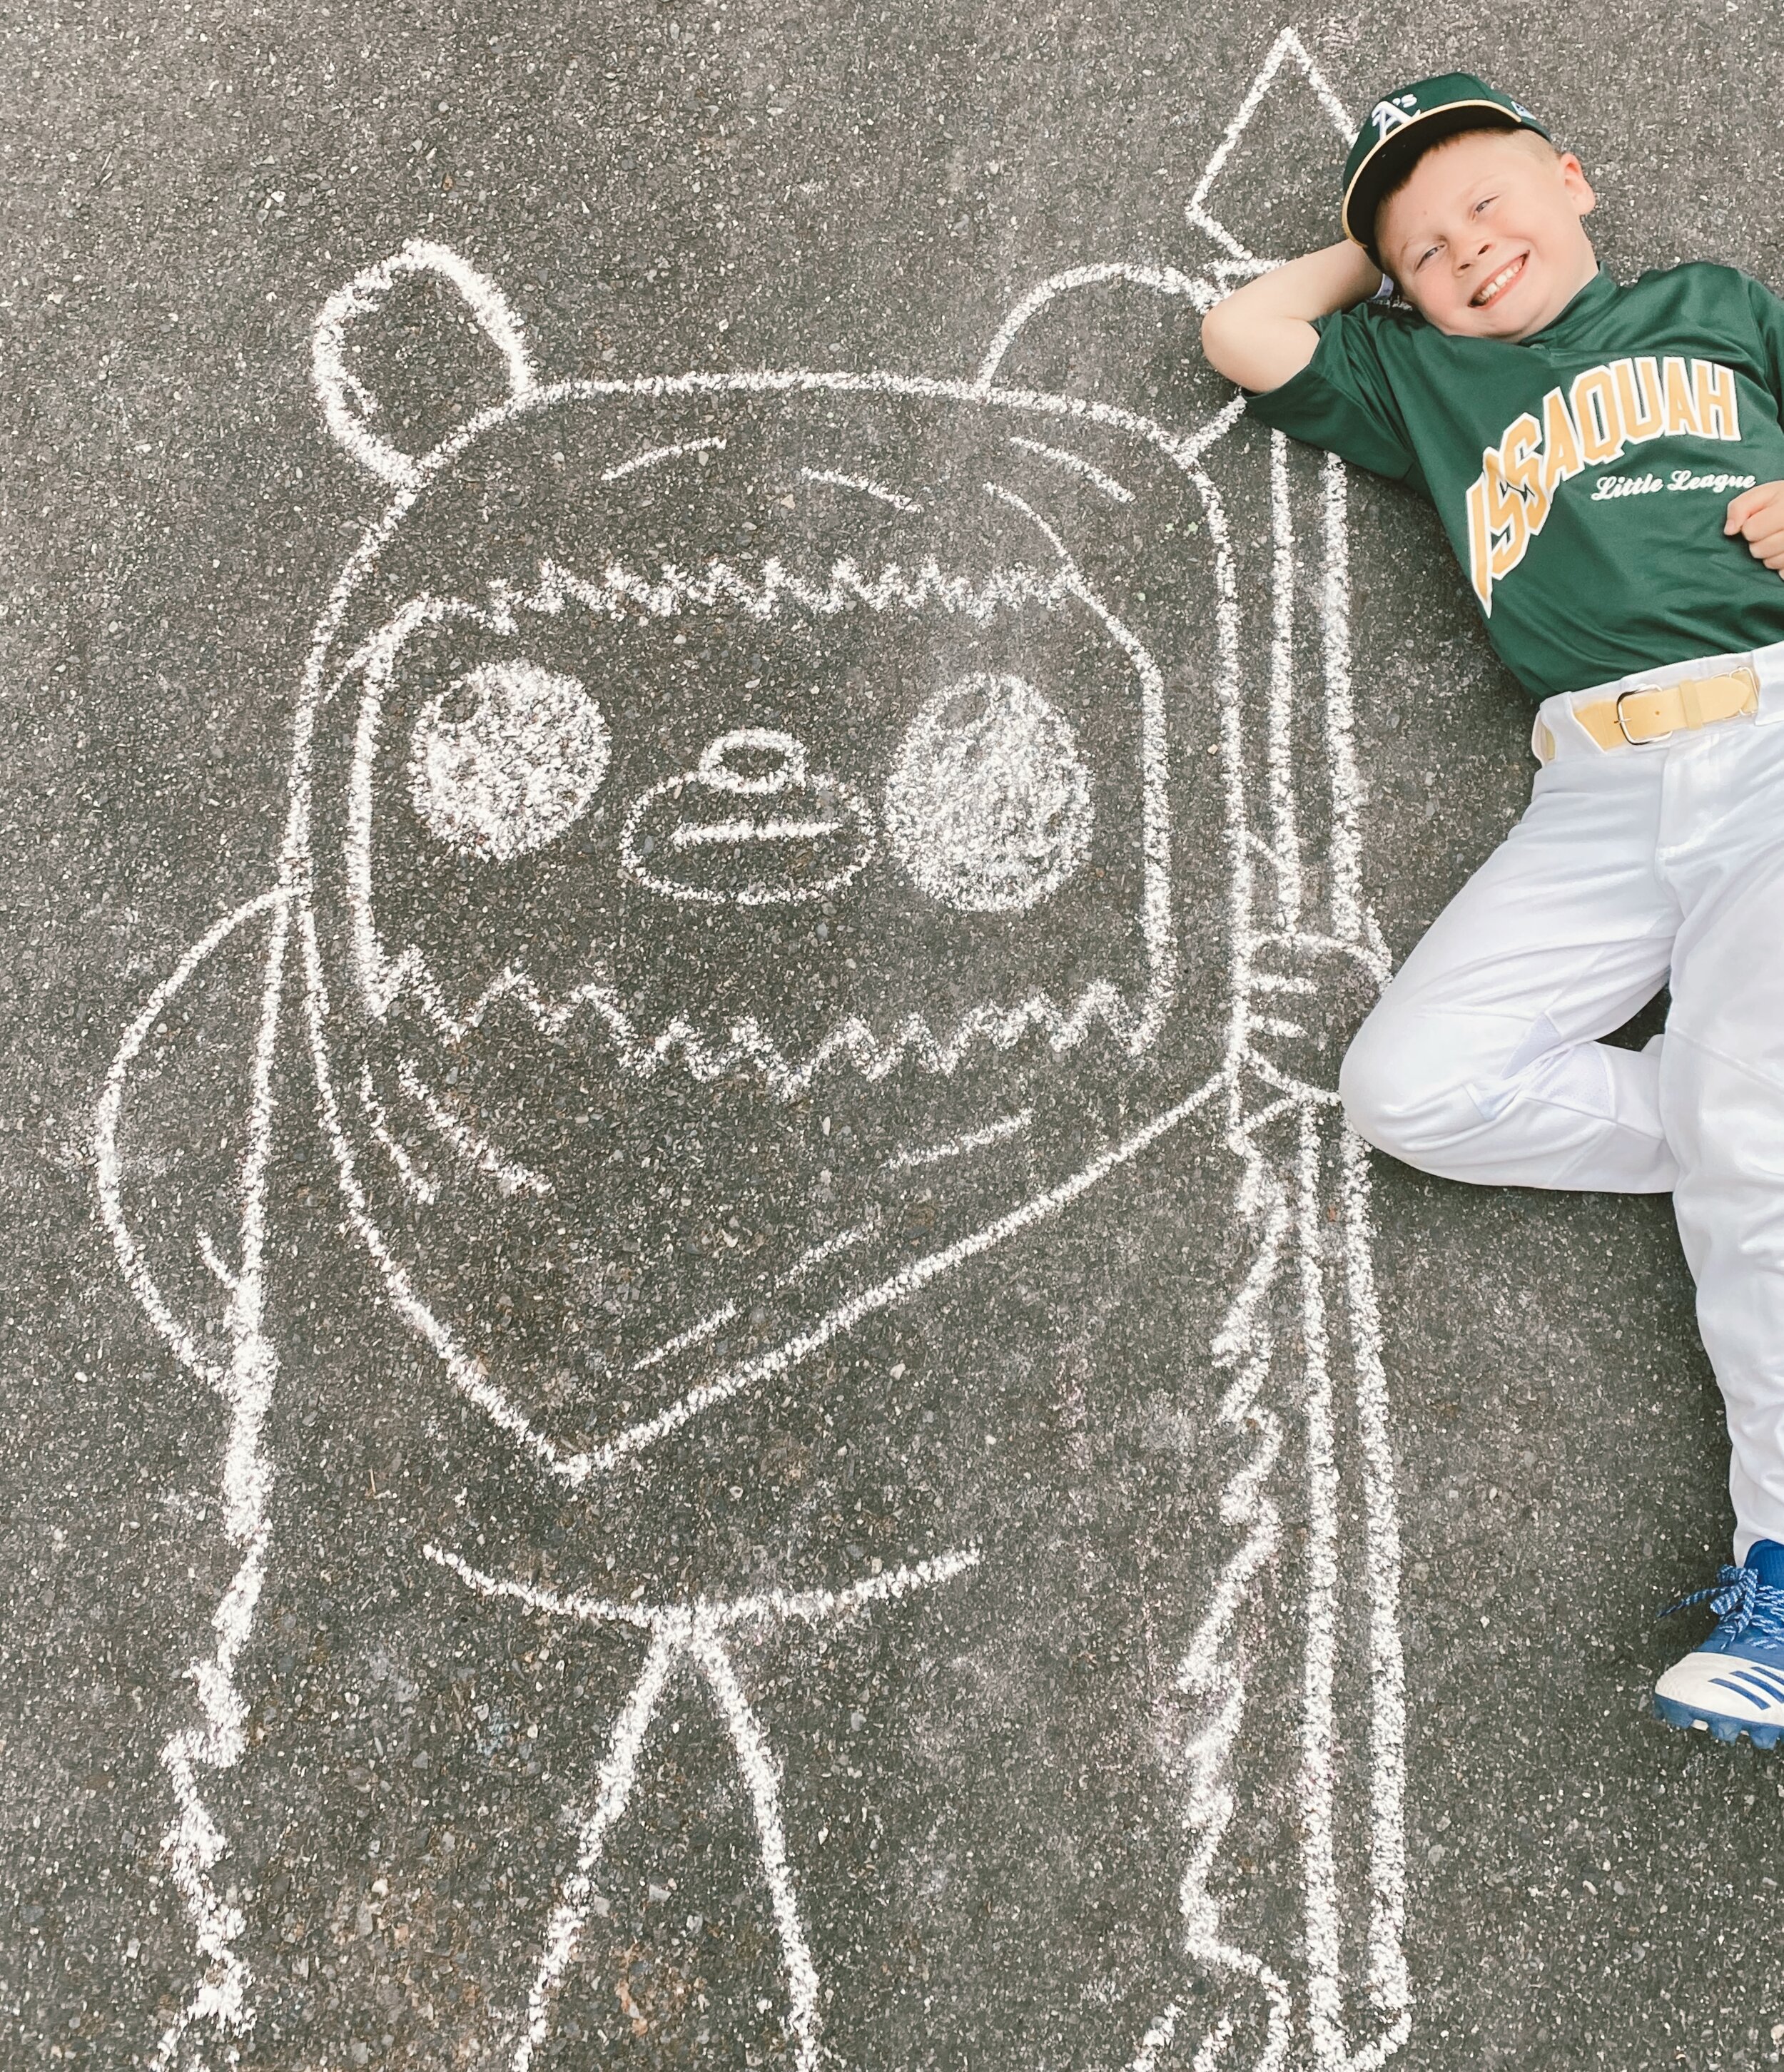  Want to score major mom points? Grab some chalk and find their favorite thing on  Art For Kids Hub!   